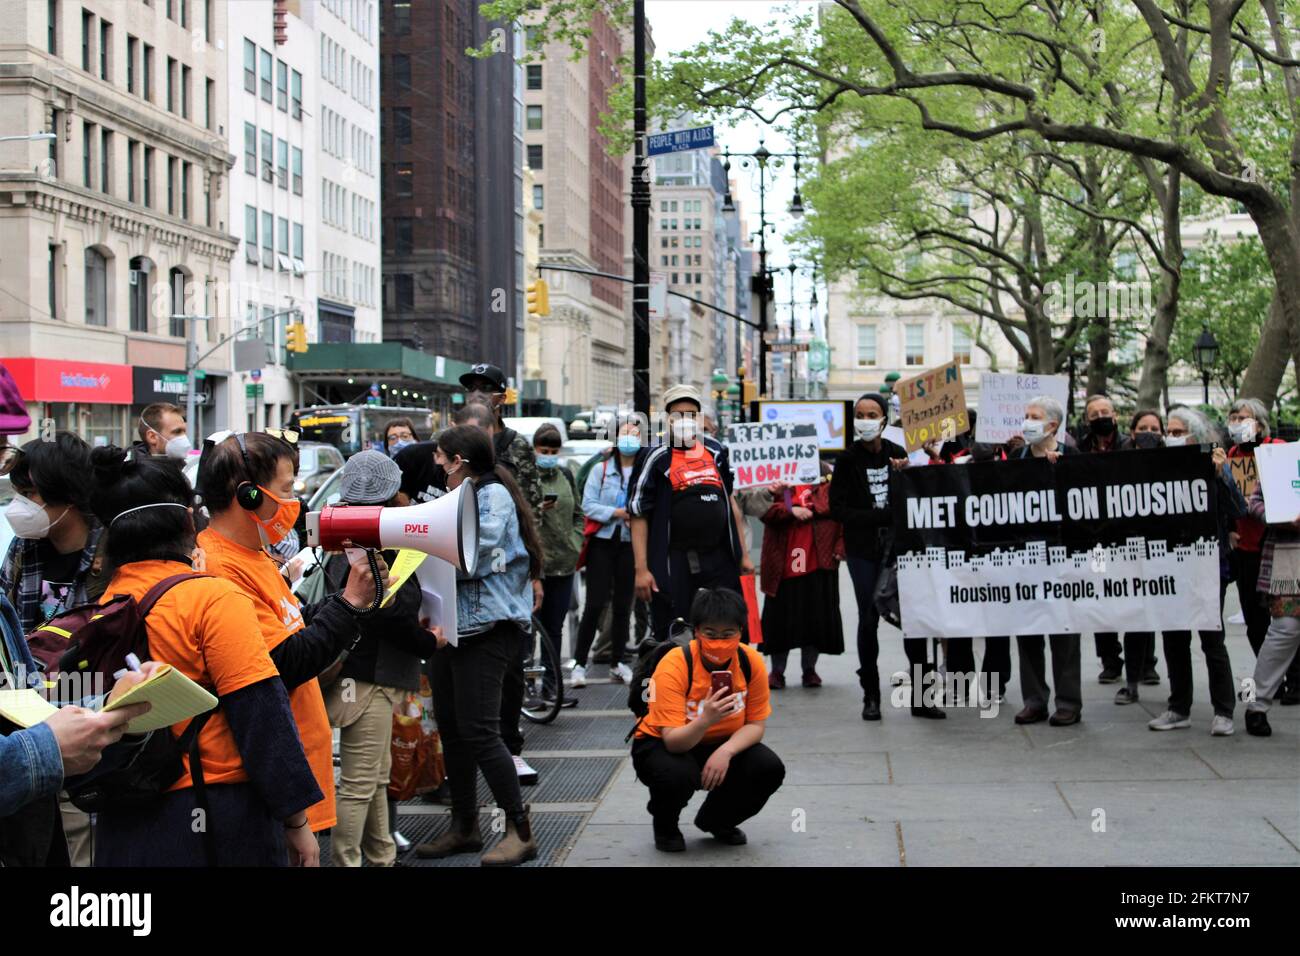 New York, USA. 03rd May, 2021 - NYC communities rally for 'RENT ROLLBACK' outside New York City Hall,  across from 250 Broadway 2 days before RGB (Rent Guidelines Board) holds their preliminary vote on May 5th 2021. Credit: Mark Apollo/Alamy Livenews Stock Photo